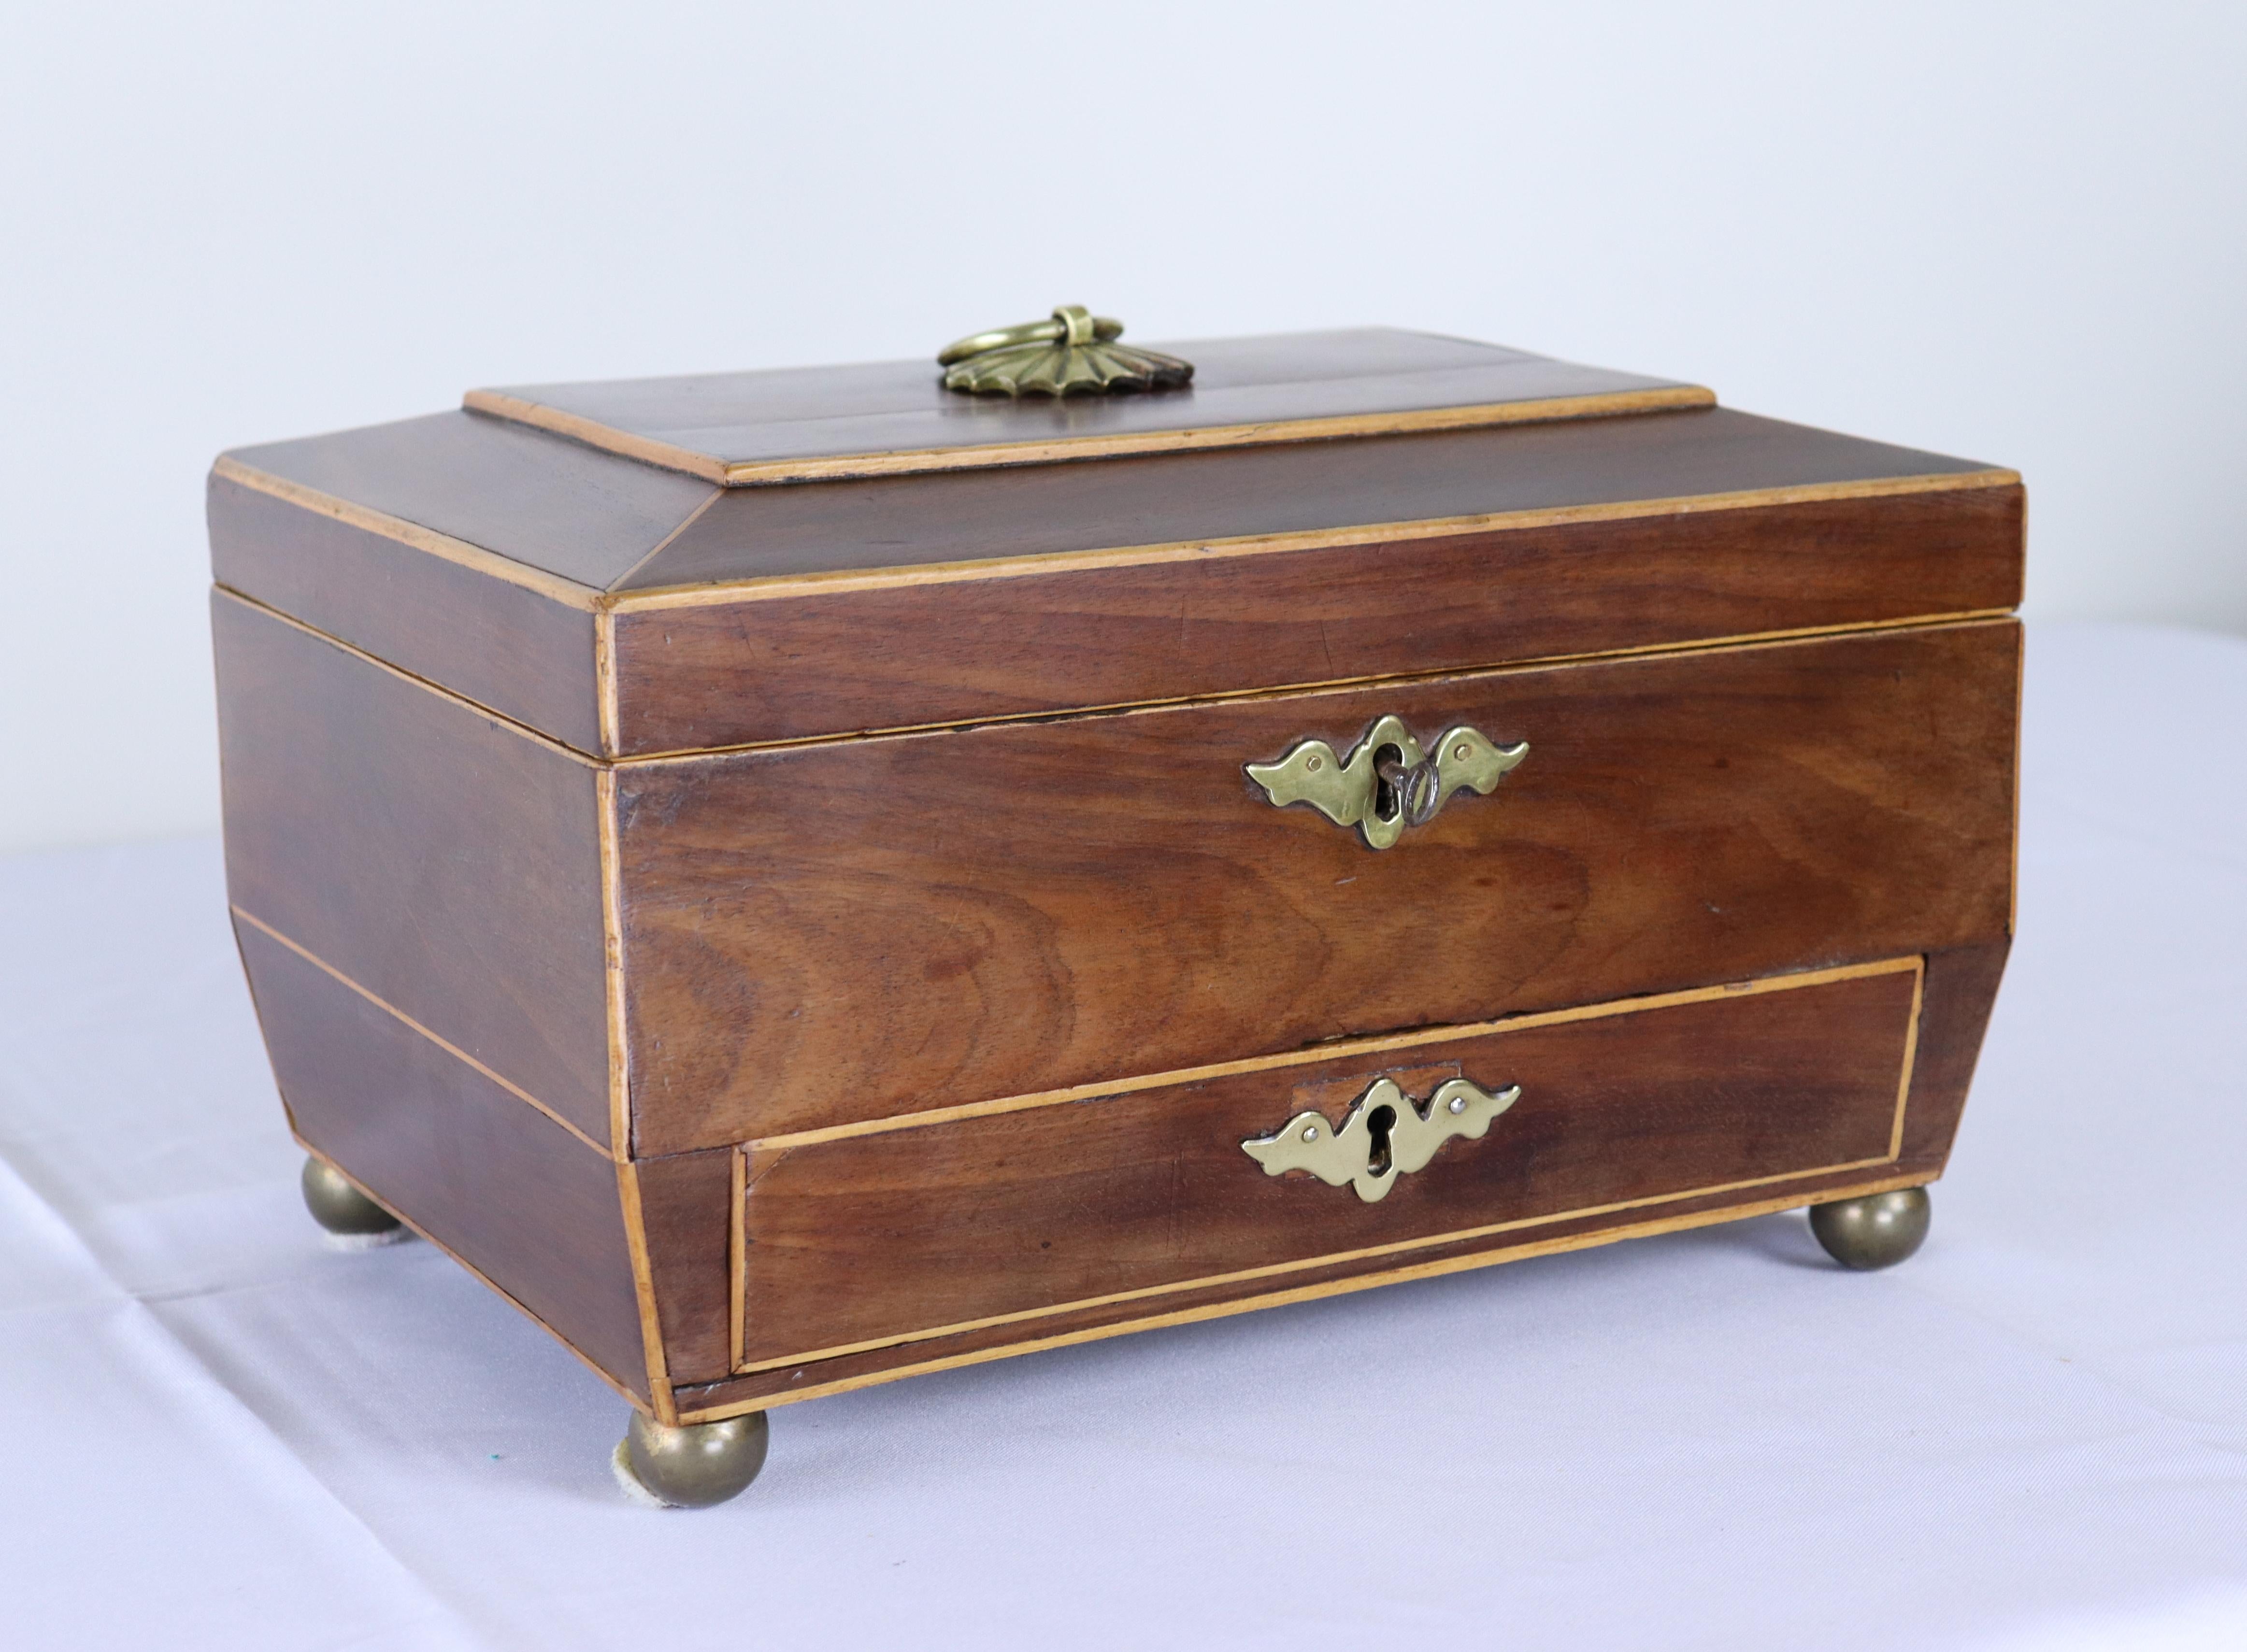 A stately sarcophagus shaped mahogany jewelry box with satinwood stringing and a hidden lower drawer.  The key fits in the key hole but does not turn easily, so more decorative than anything.